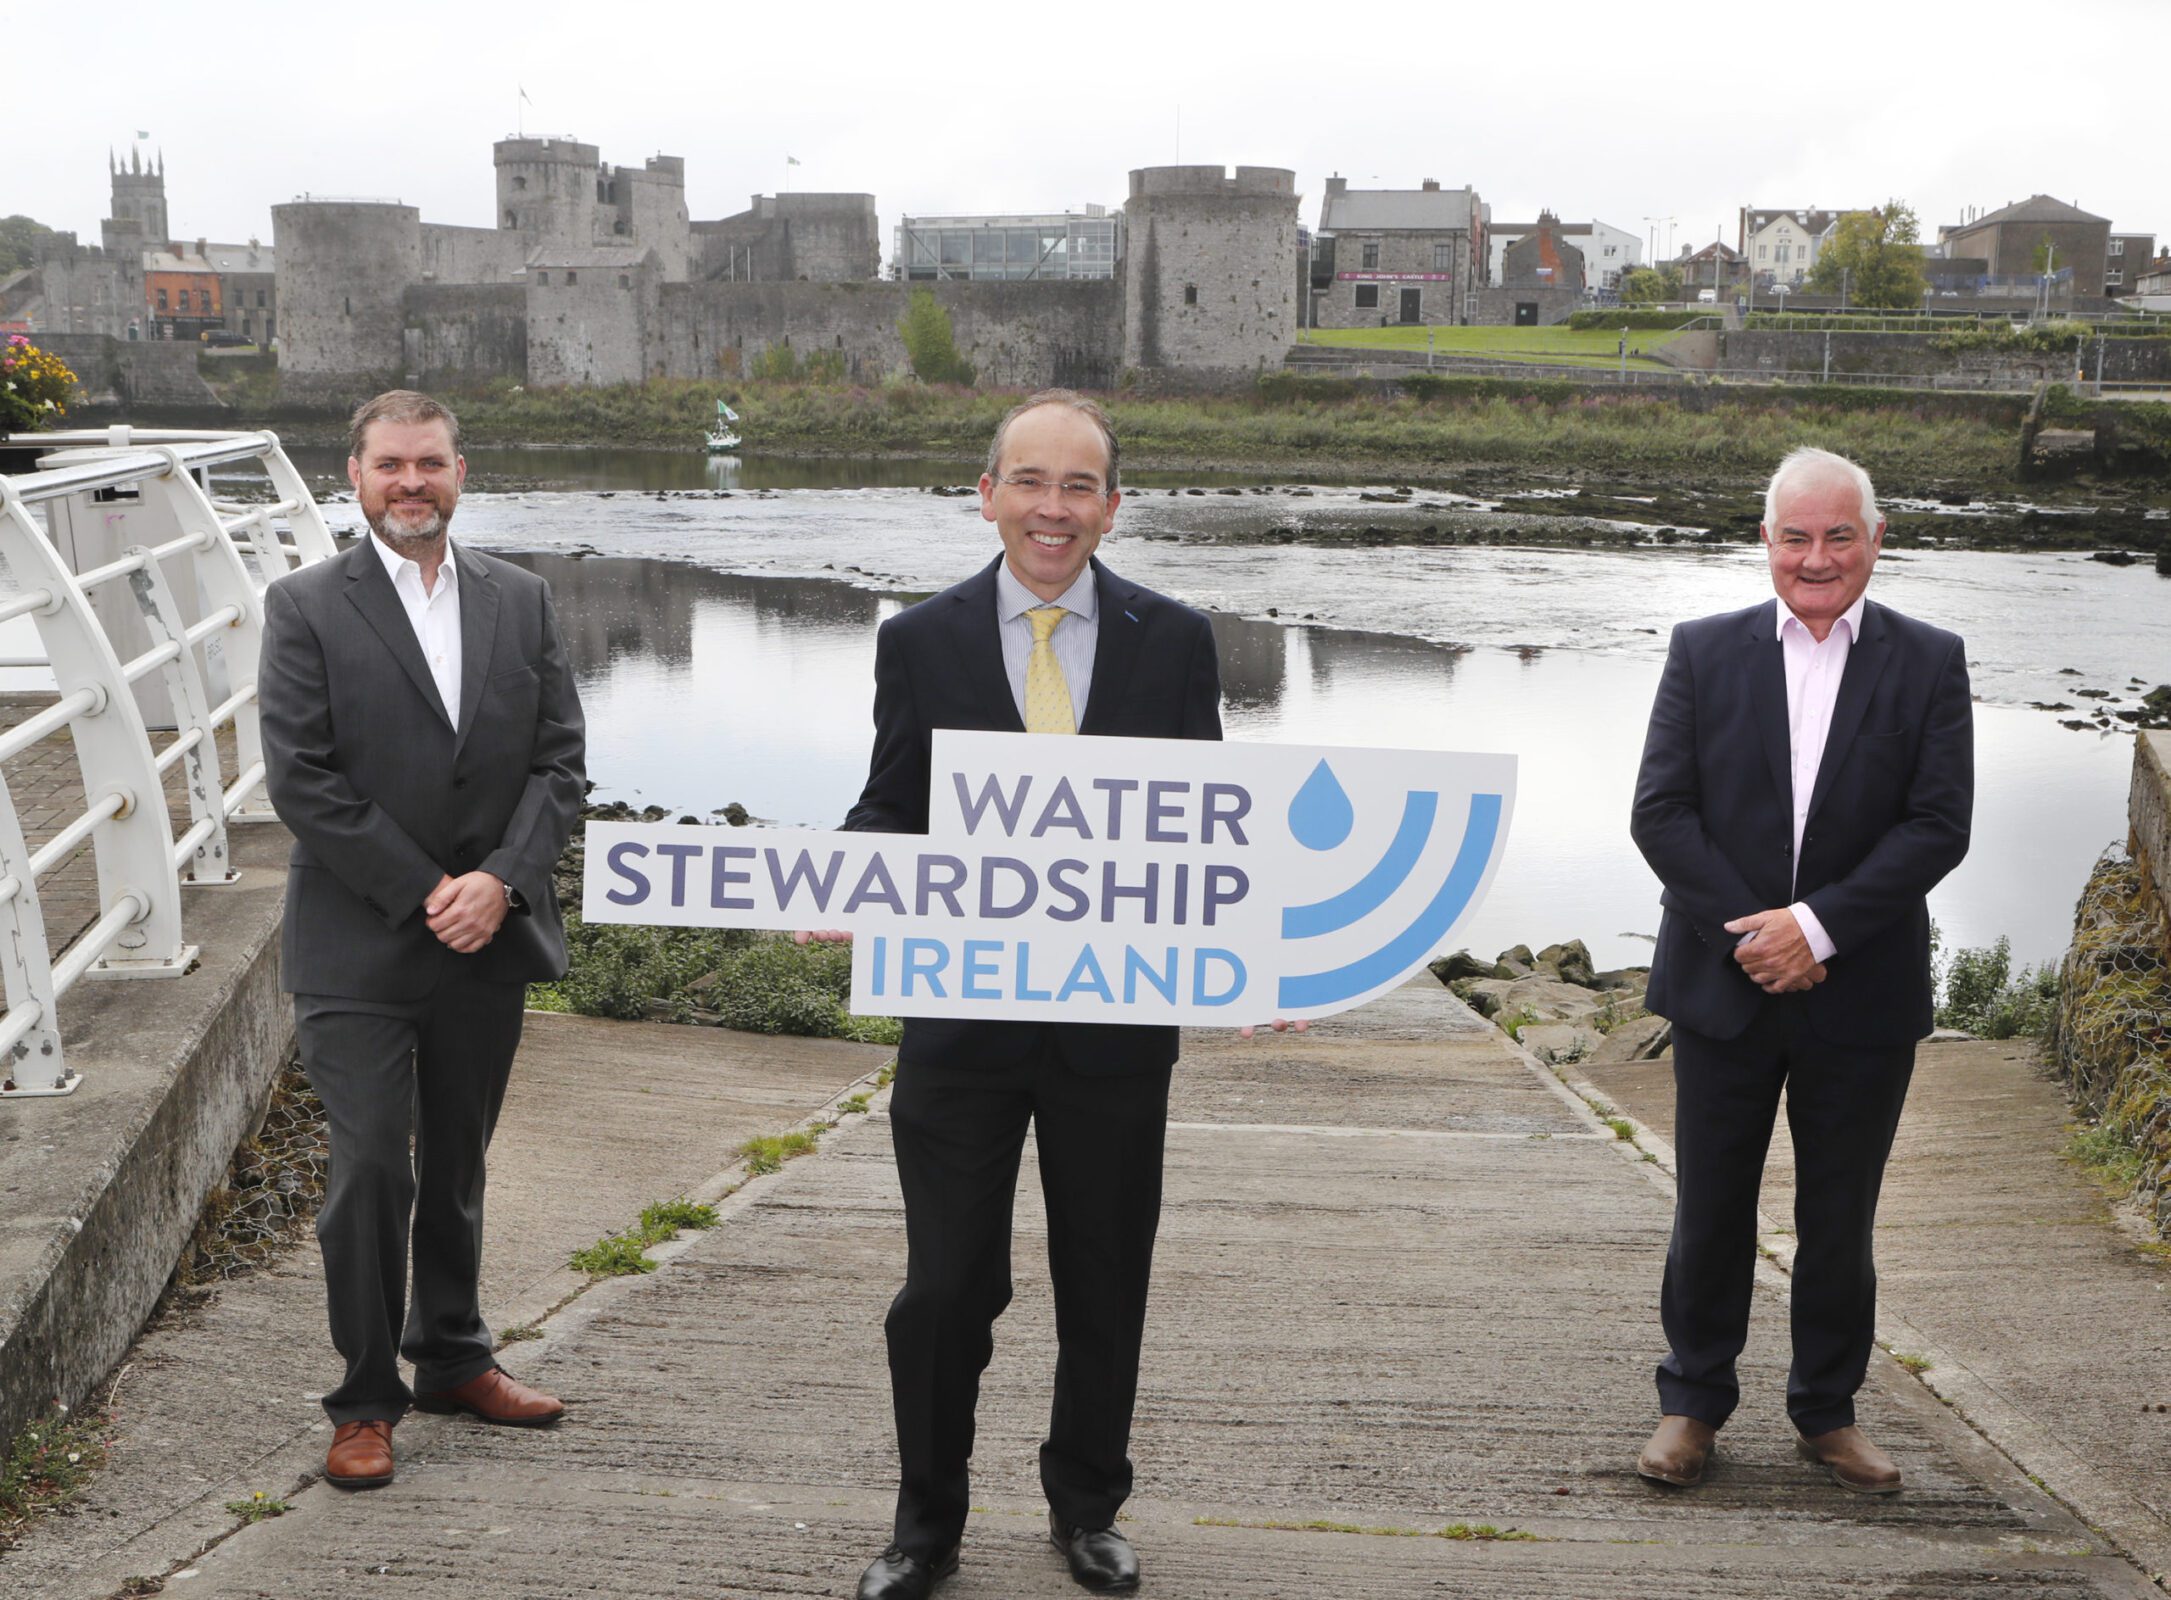 With Compliments. The Large Water Users CoP are rebranding as Water Stewardship Ireland represented by Ian Ryan, Water Stewardship Ireland Advisory Board Member / Utilities Manager Wyeth Nutrition, Ken Stockil, Chair Water Stewardship Ireland and CEO of Central Solutions and John Durkan, Water Stewardship Ireland Advisory Board Member / Sustainability and Environmental Manager ABP Food Group which is an industry-led, collaborative network of leading businesses, agencies and international stakeholders focussed on the development and adoption of best practices, insights, skills and innovative tools at their facilities and across their global supply chains. Water Stewardship Ireland is facilitated by Central Solutions. Over the last number of years, the Water Stewardship Ireland team has worked with hundreds of leading organisations to drive better corporate water stewardship and help address this critical global challenge, collectively. Photograph Liam Burke/Press 22